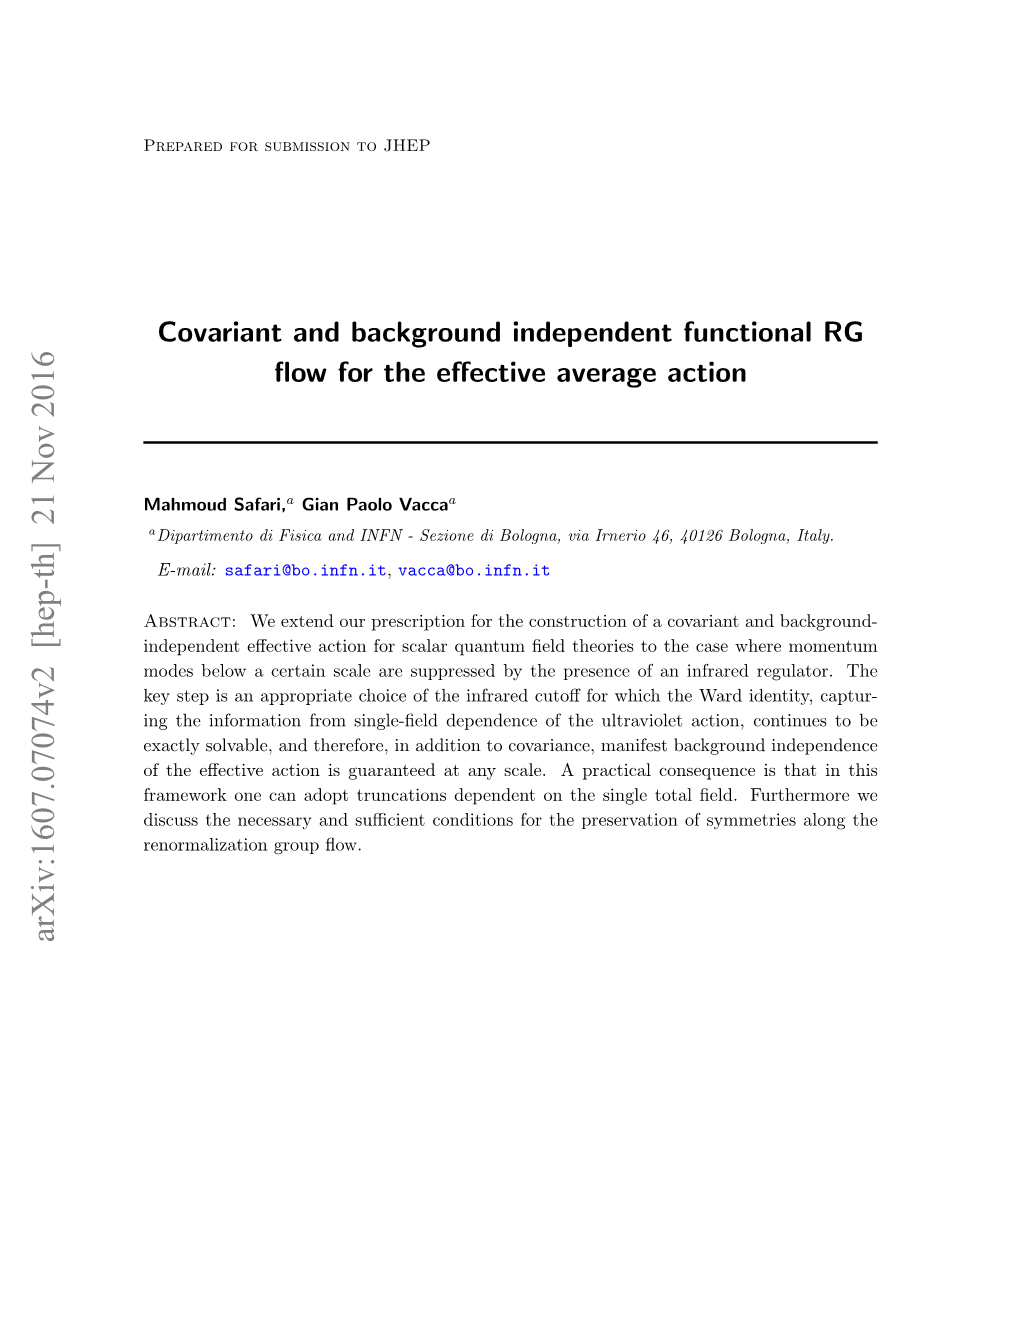 Covariant and Background Independent Functional RG Flow For